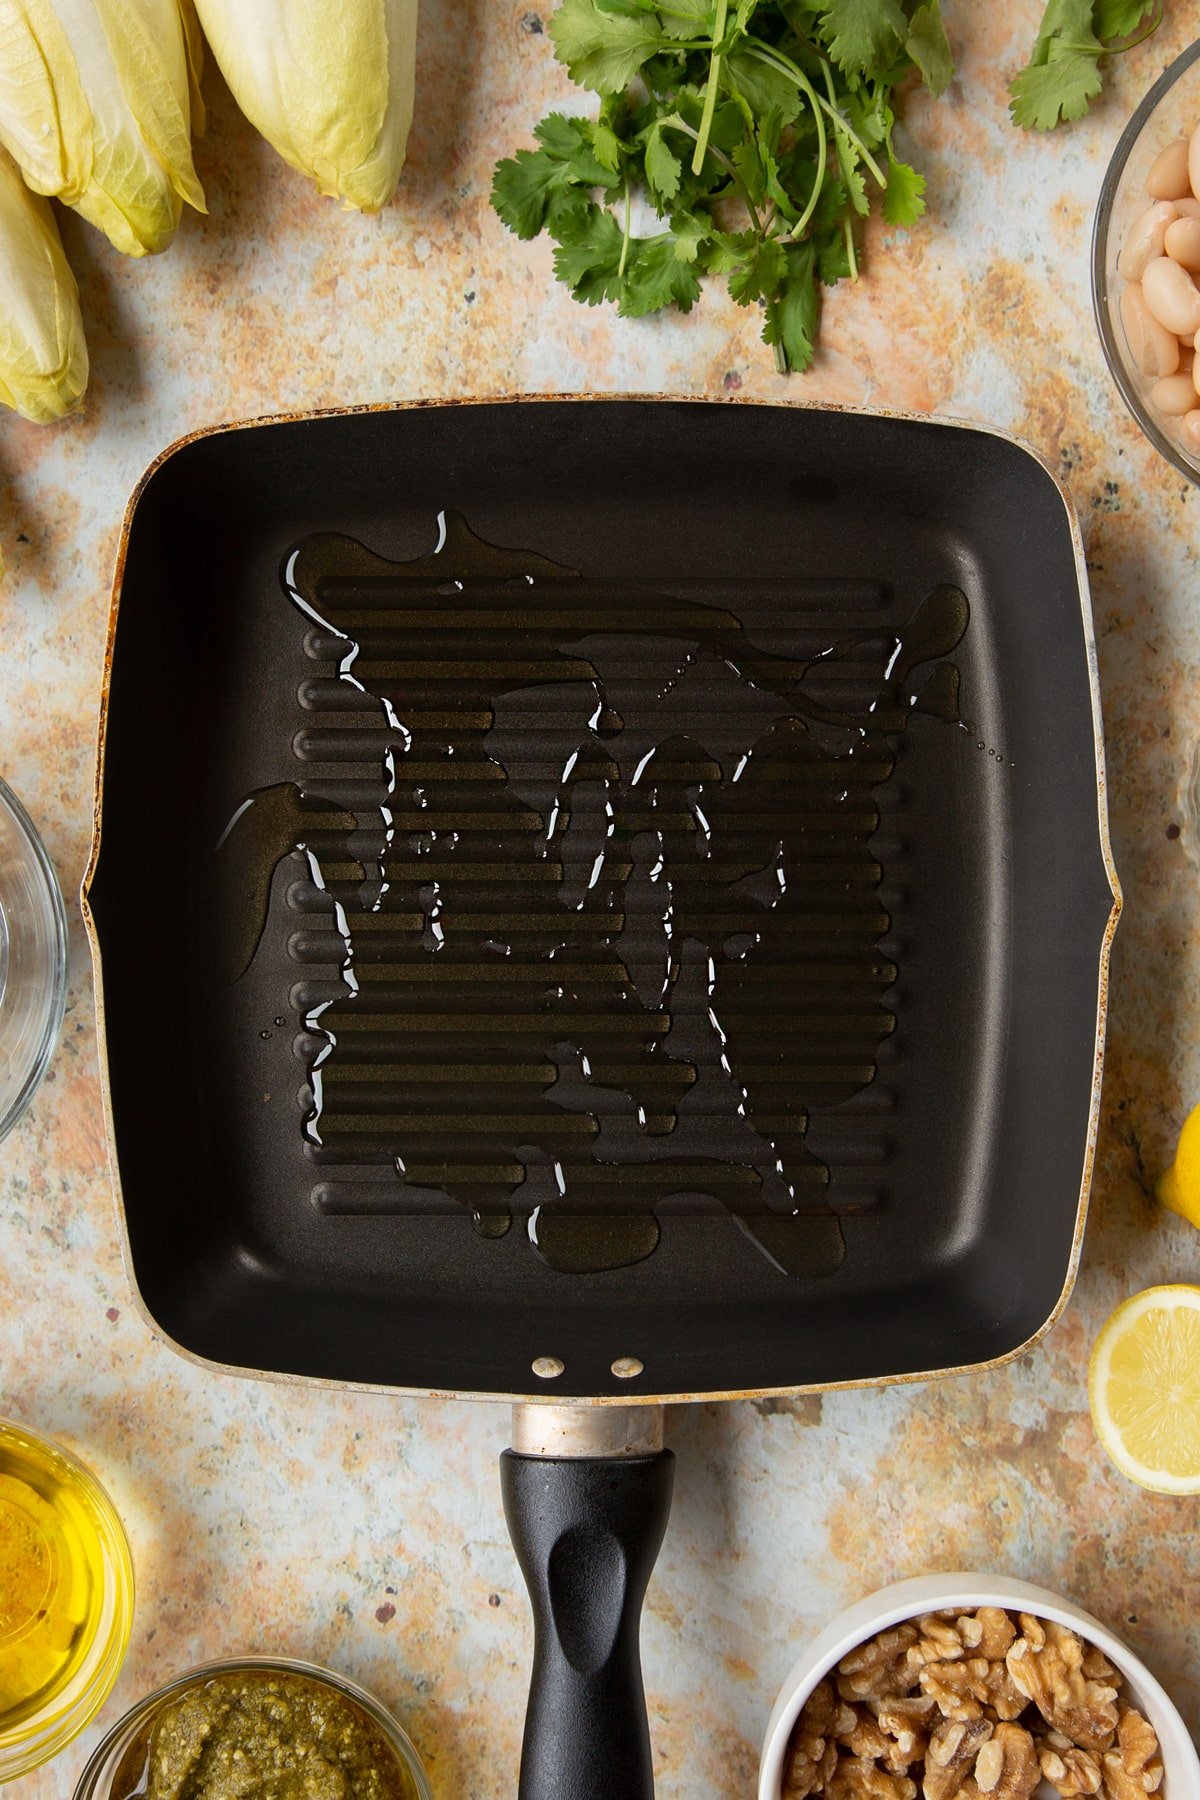 An oiled griddle pan.